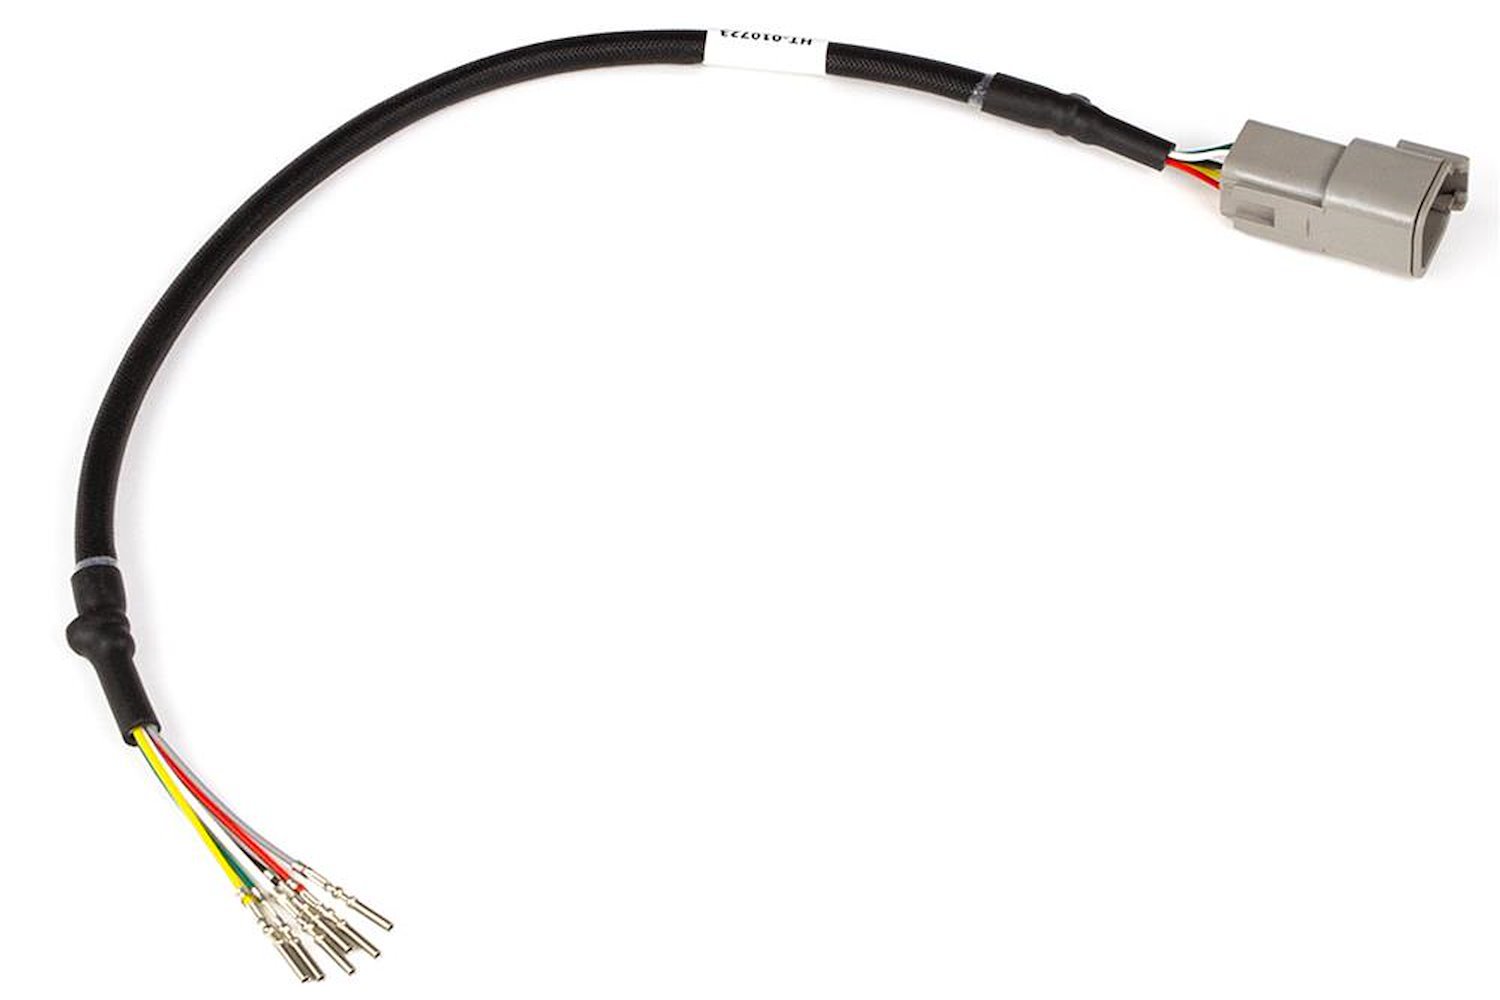 HT-010723 Wideband Flying Lead Adaptor Harness, 16 in. Length